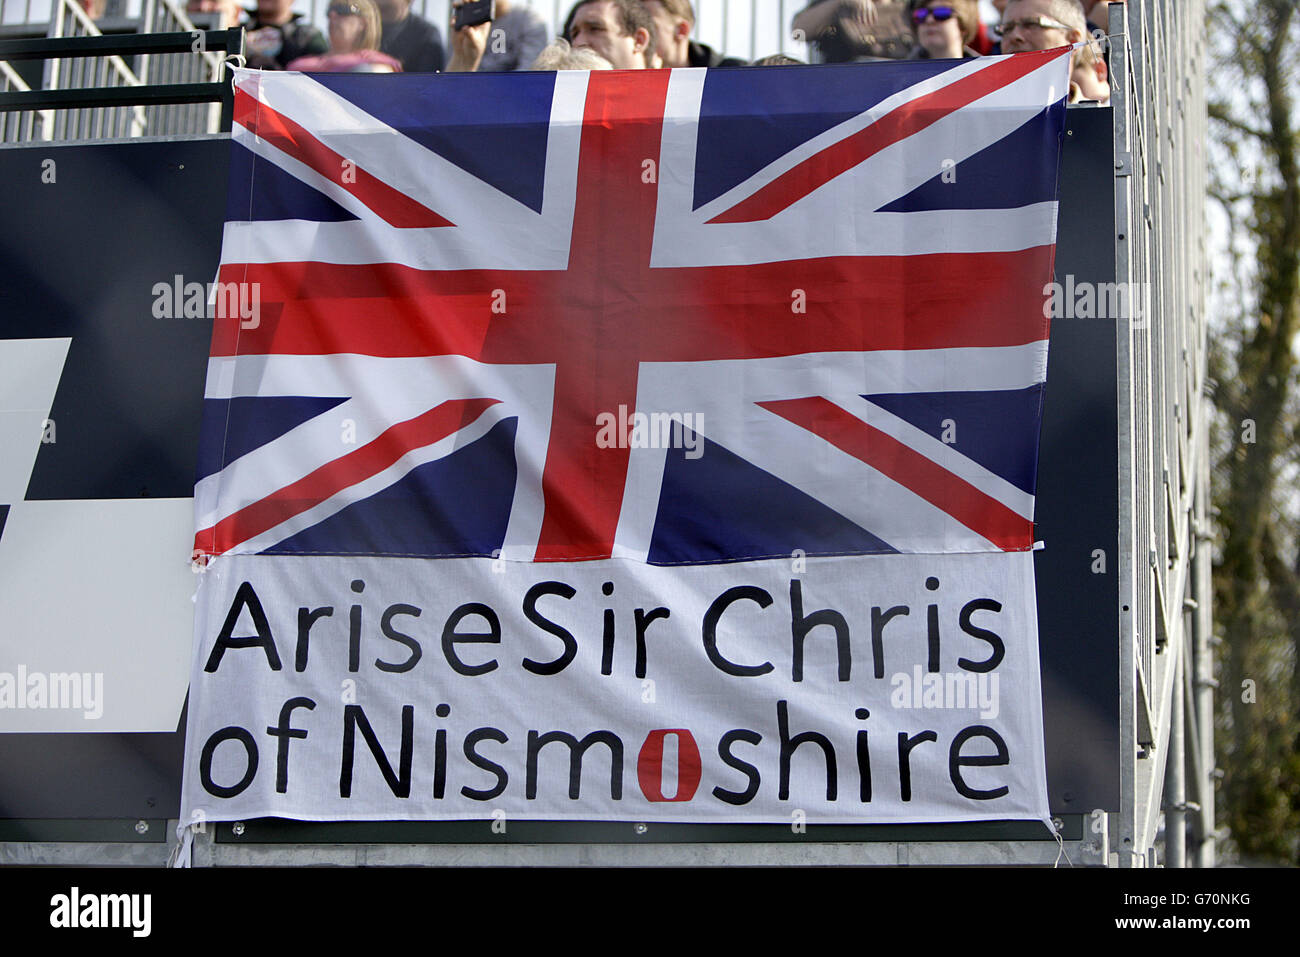 A banner showing support for Nissan GT Academy Team's Sir Chris Hoy during Race Two of the Avon Tyres British GT Championship at Oulton Park, Cheshire. Stock Photo